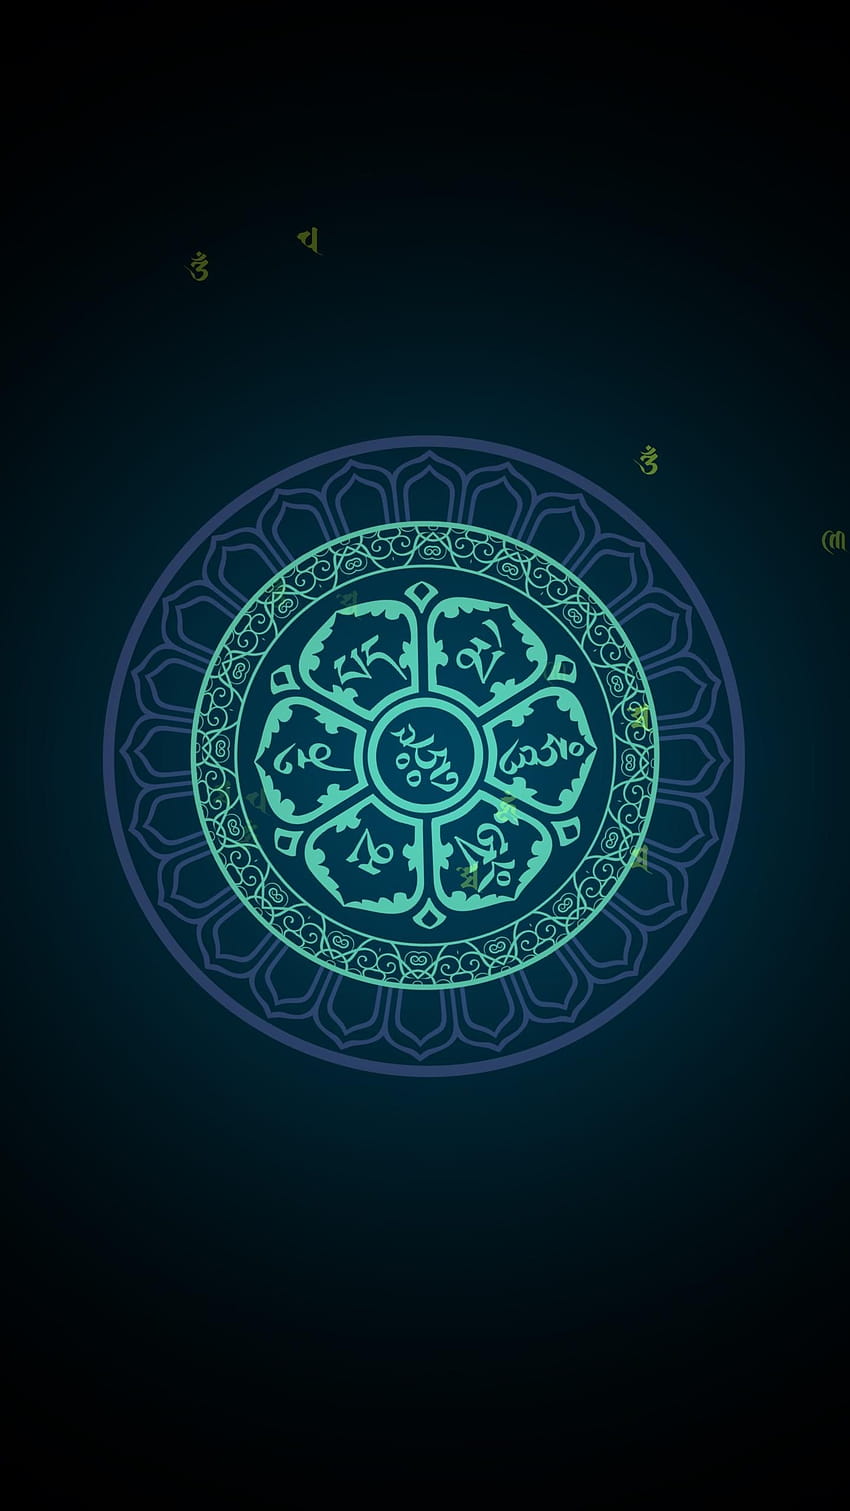 Love this lotus flower of the Om mani padme hum mantra. Perfect, minimal oled HD phone wallpaper